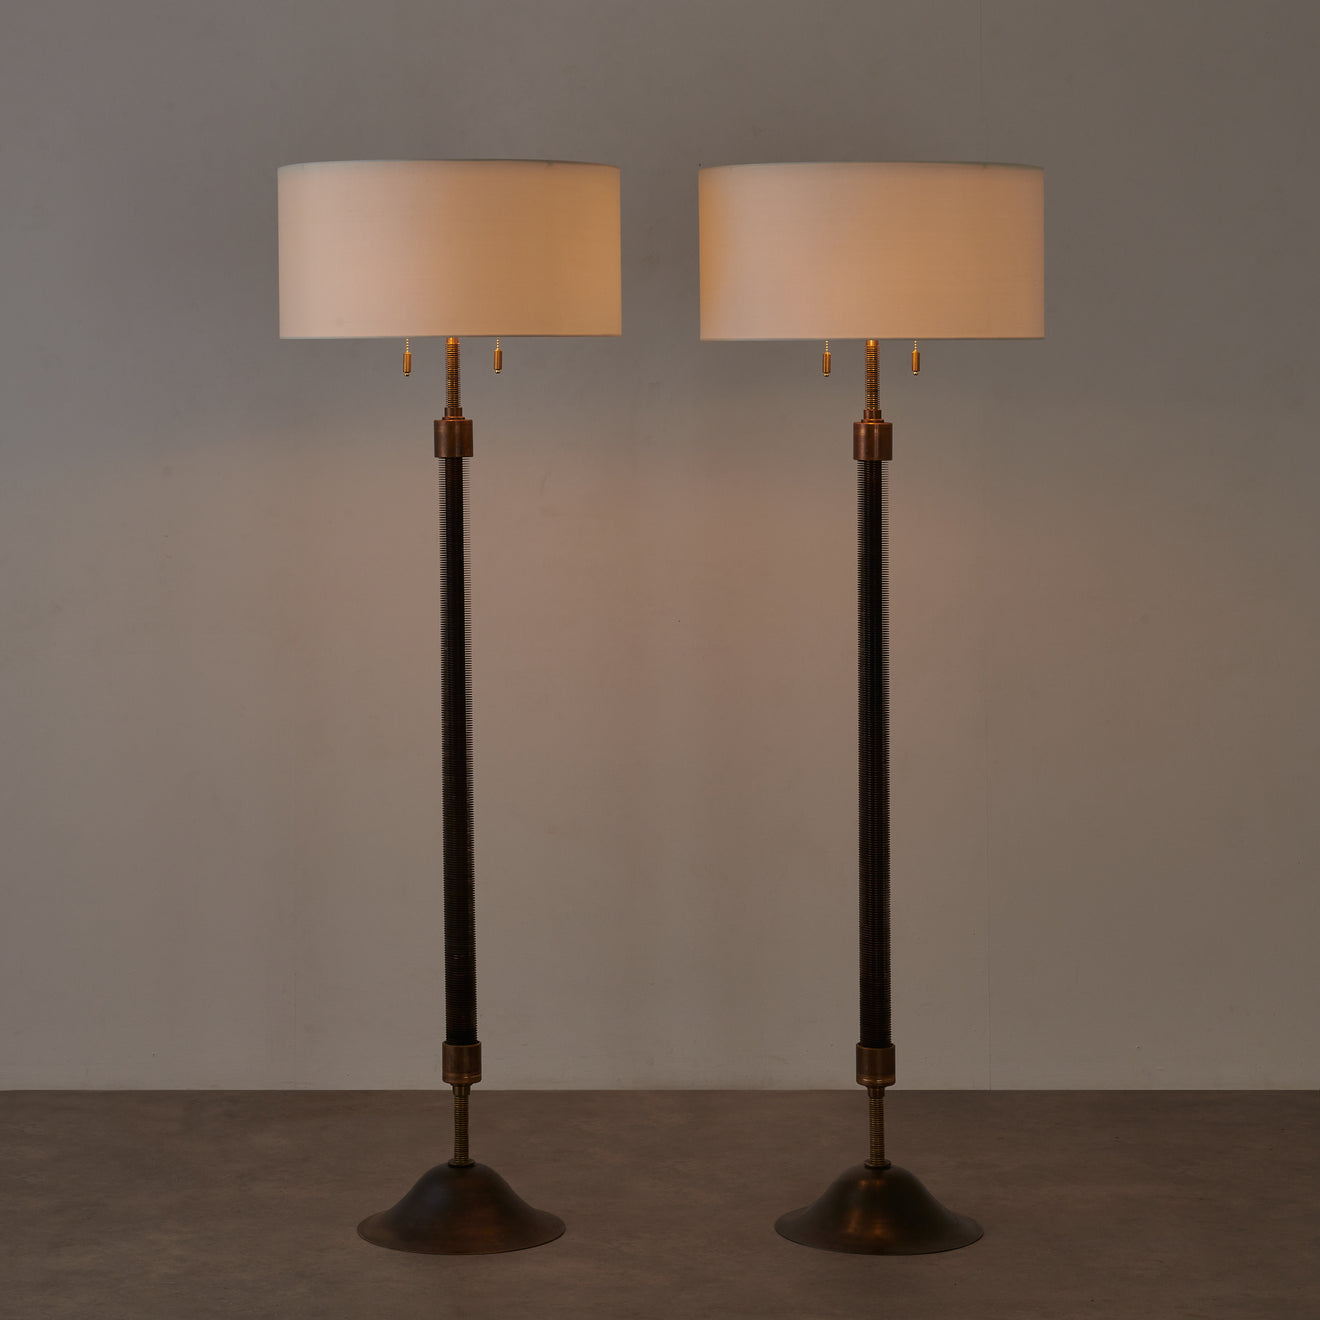 PIERRE STANDING LAMP BY GIANNI VALLINO